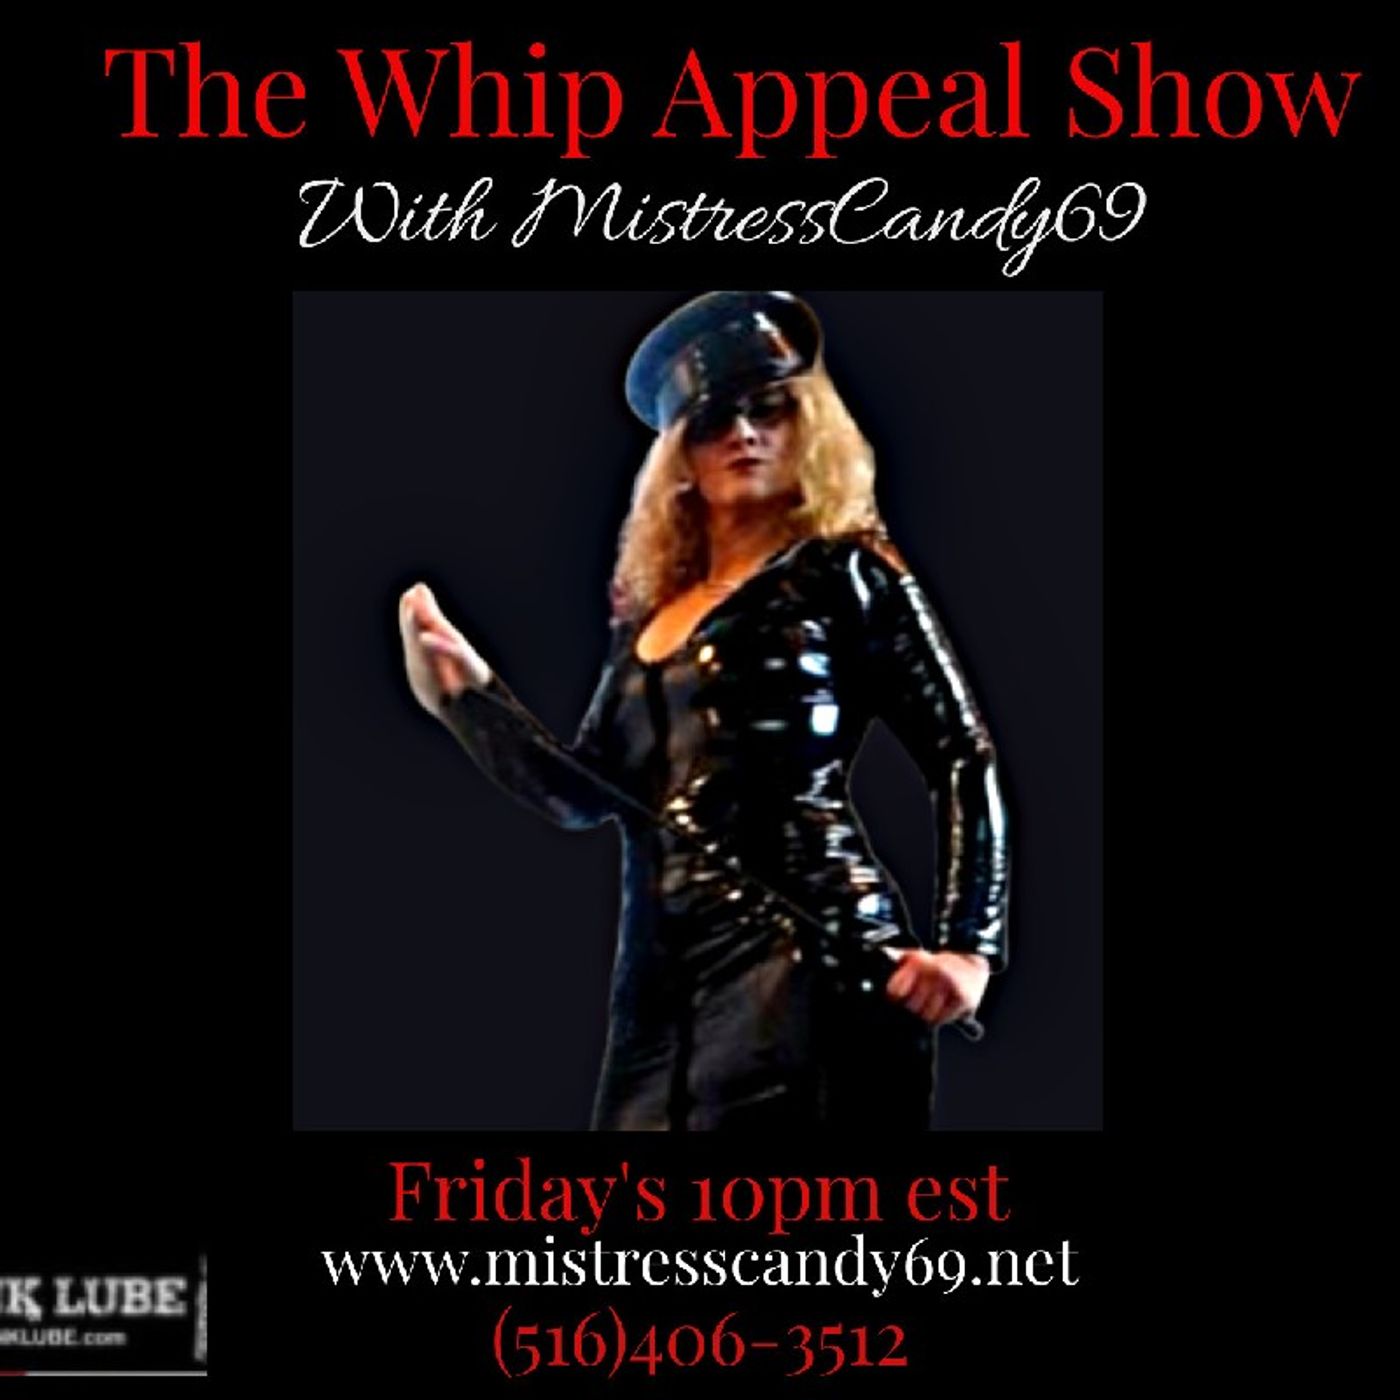 08/13/2022 THE WHIP APPEAL with MistressCandy69